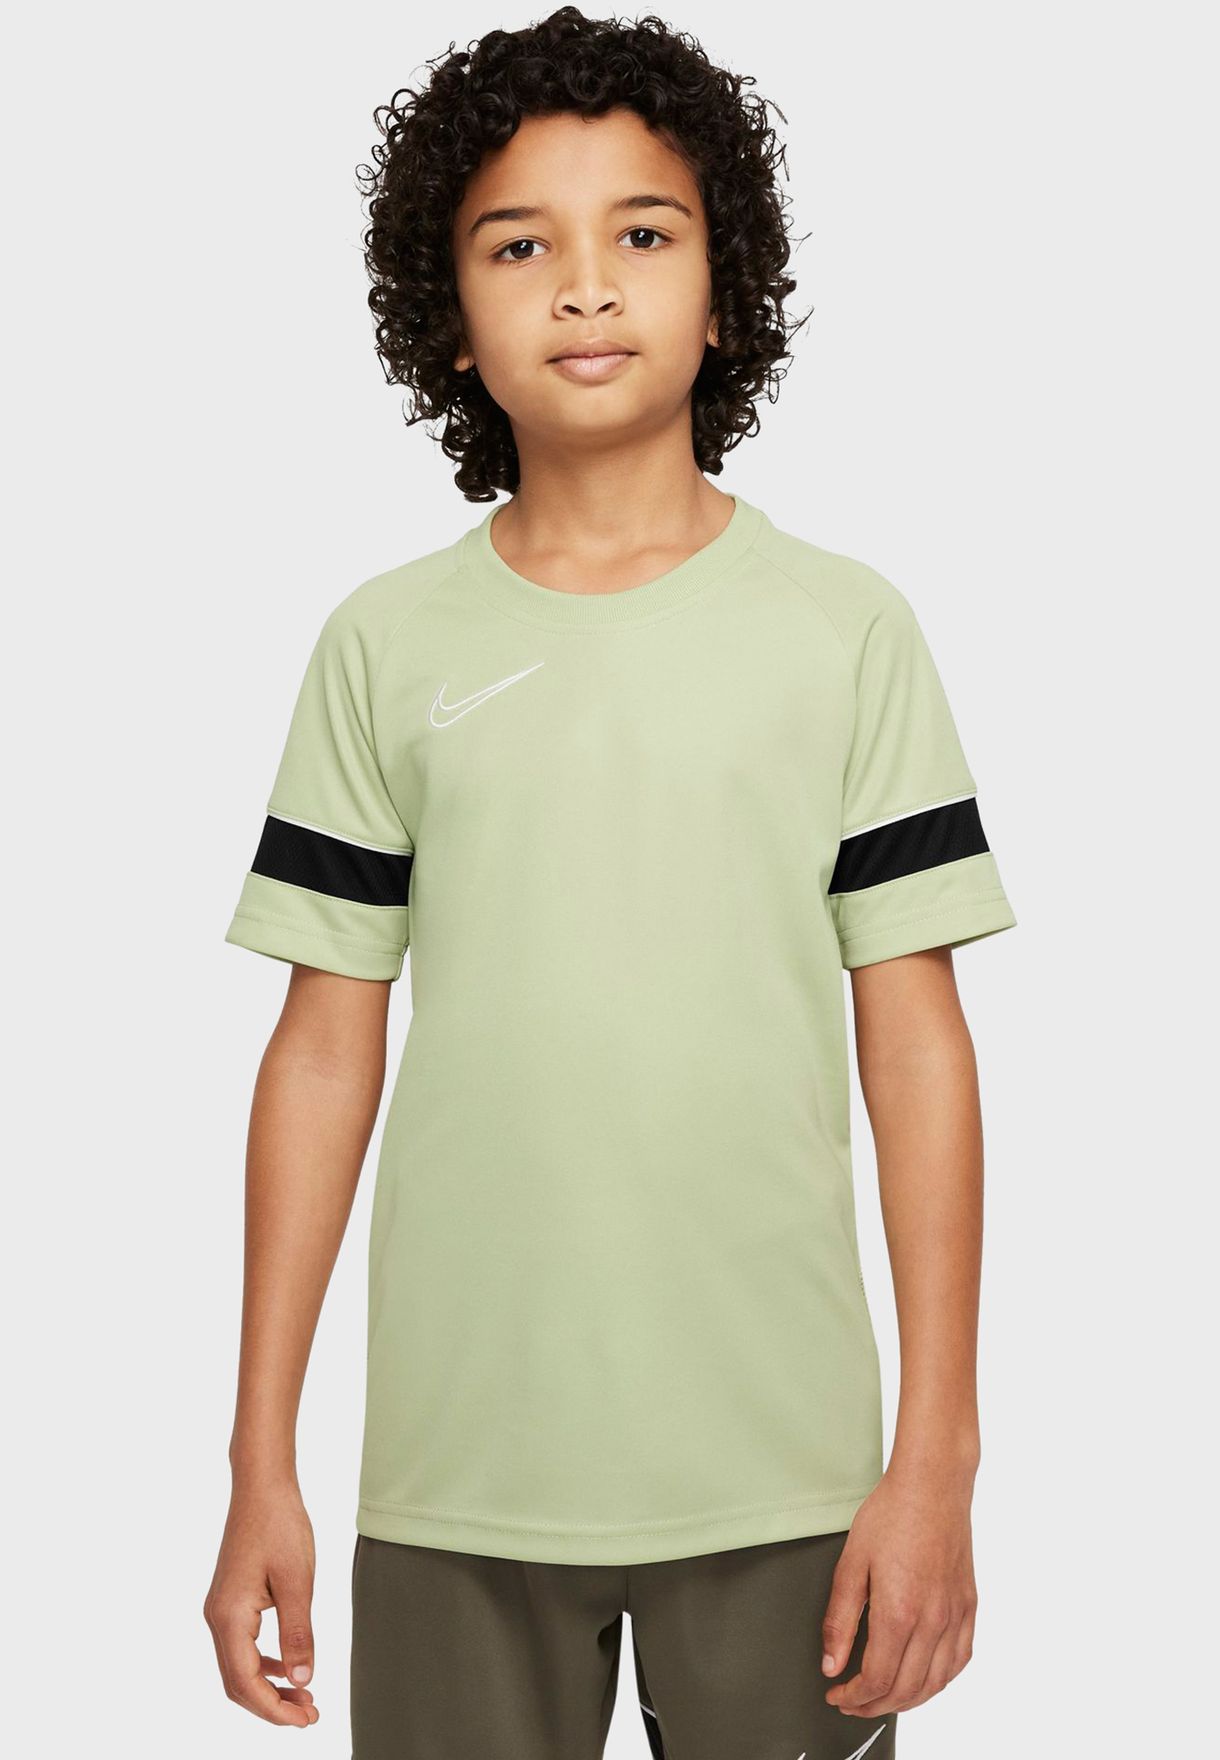 Youth Dri-Fit Academy T-Shirt